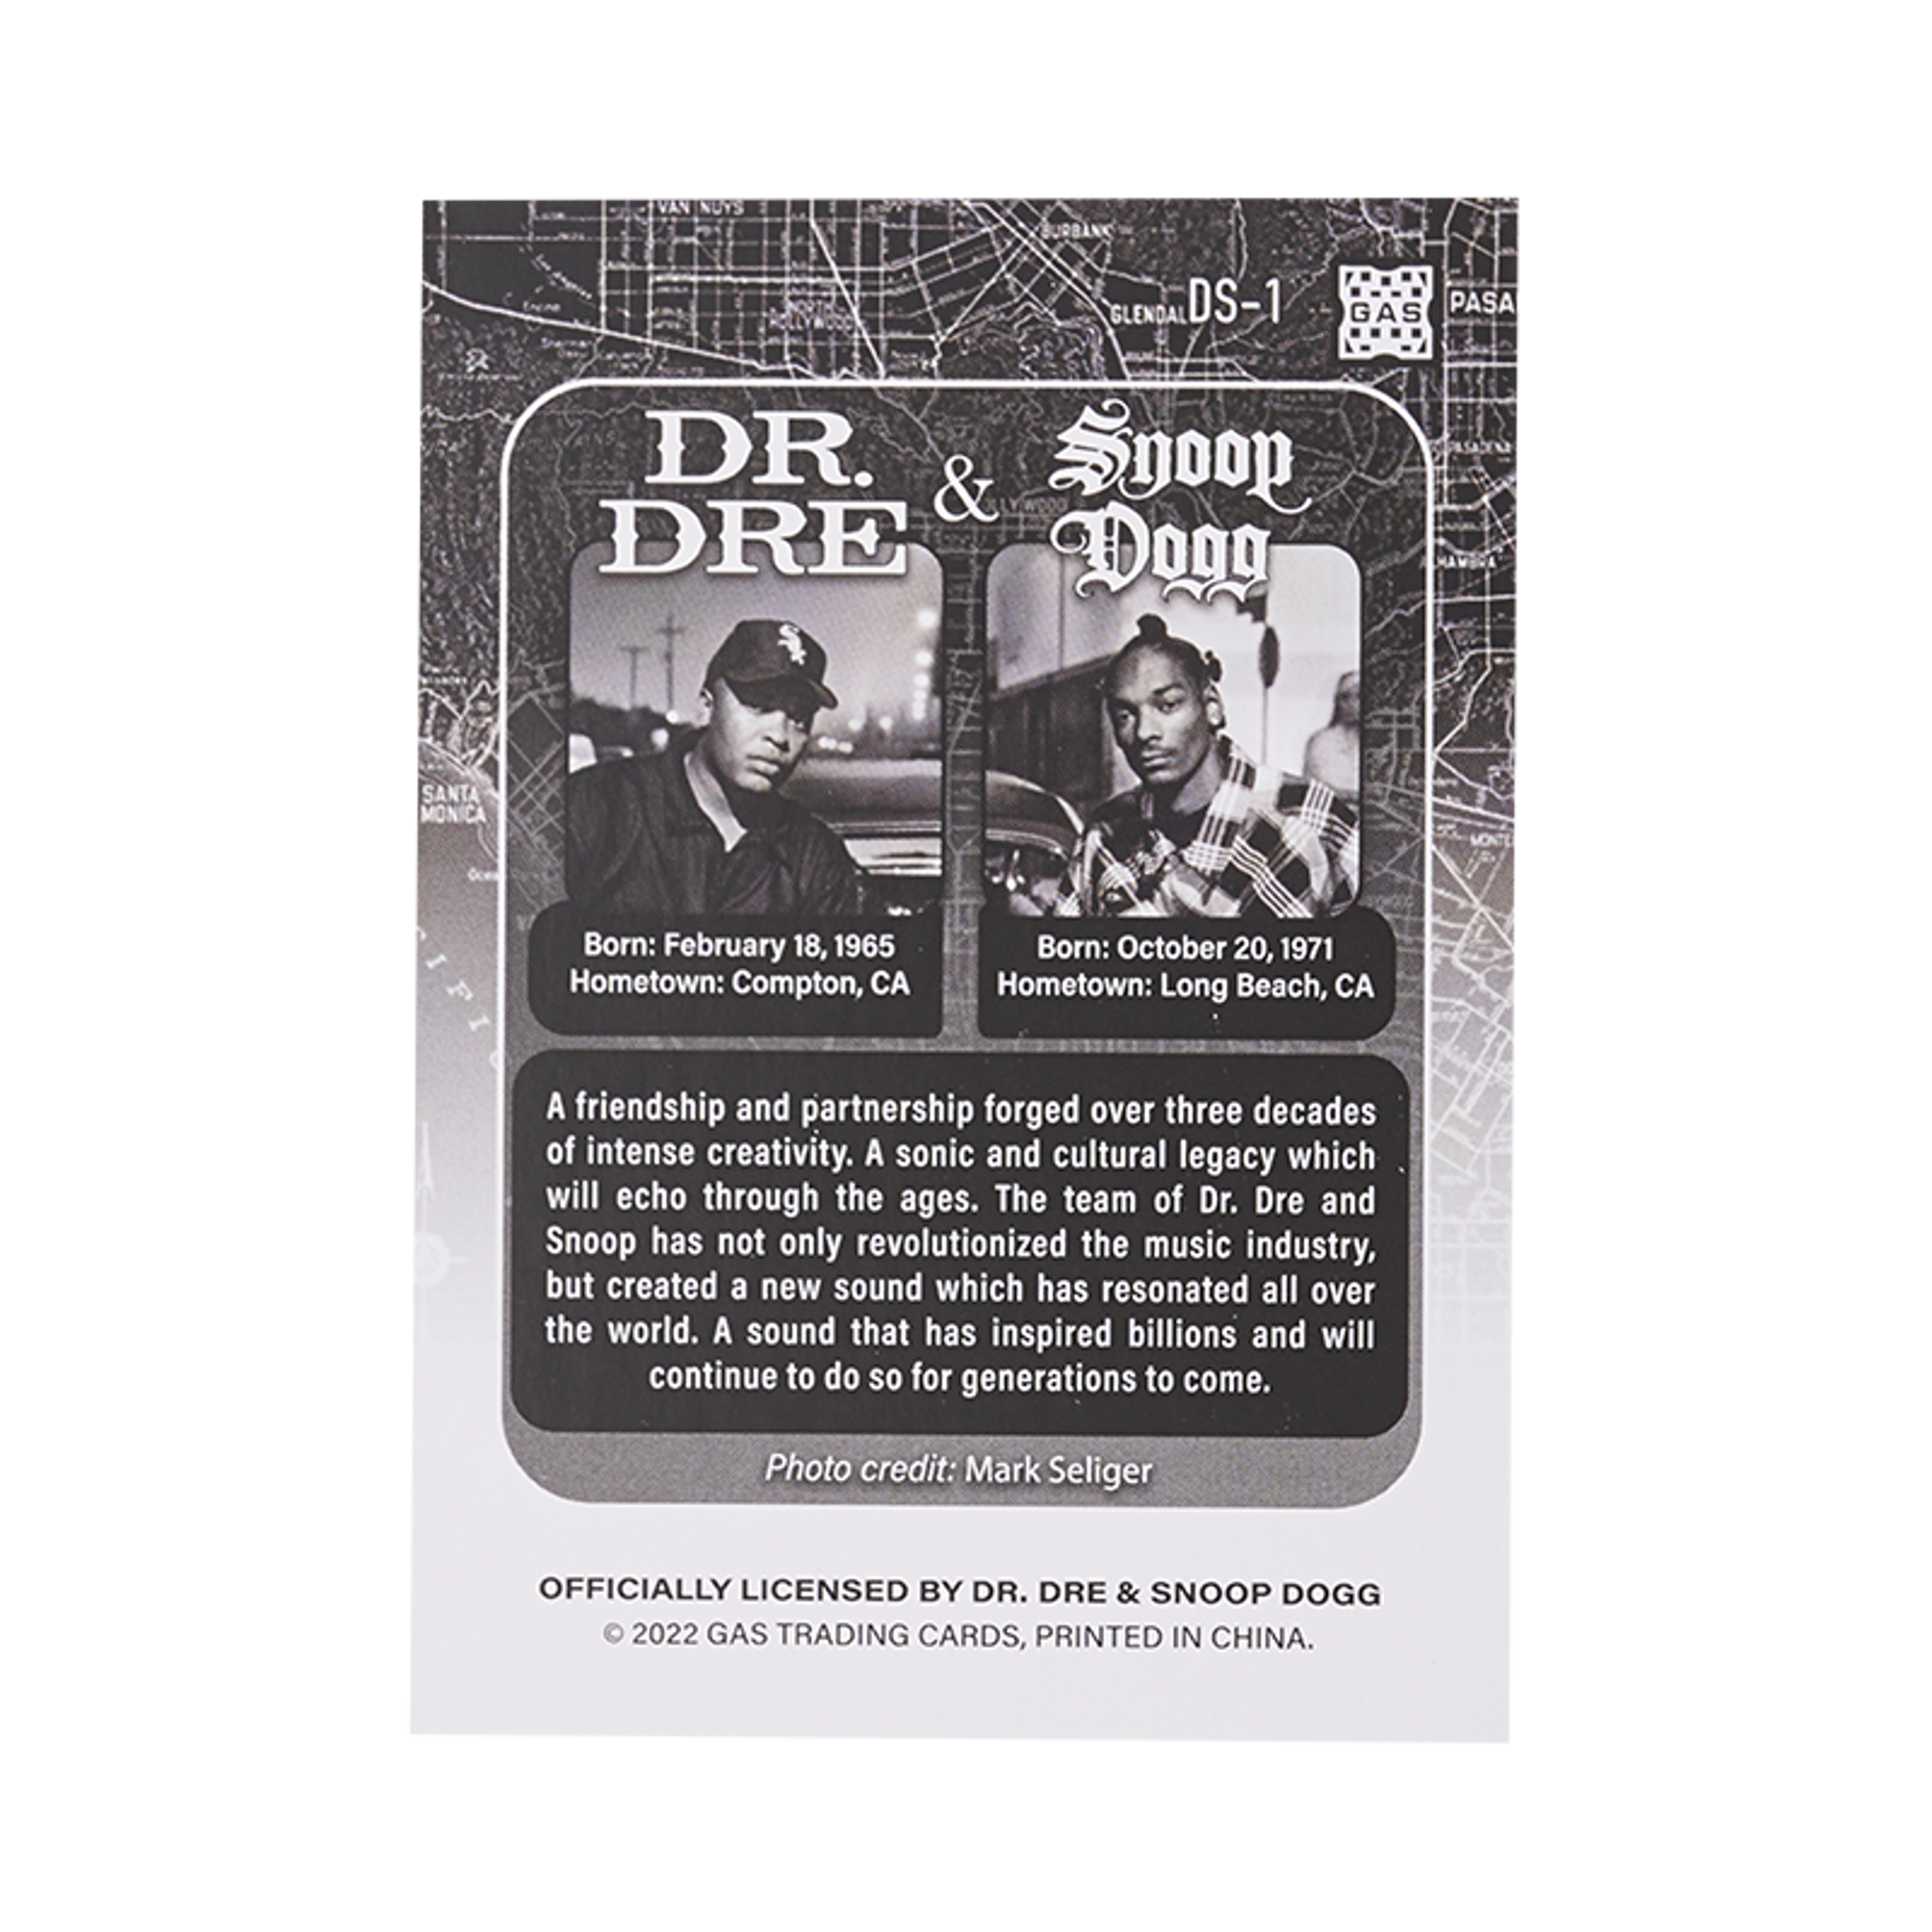 Alternate View 1 of The Official Dr. Dre & Snoop Dogg Deluxe GAS Trading Card Tin Bo